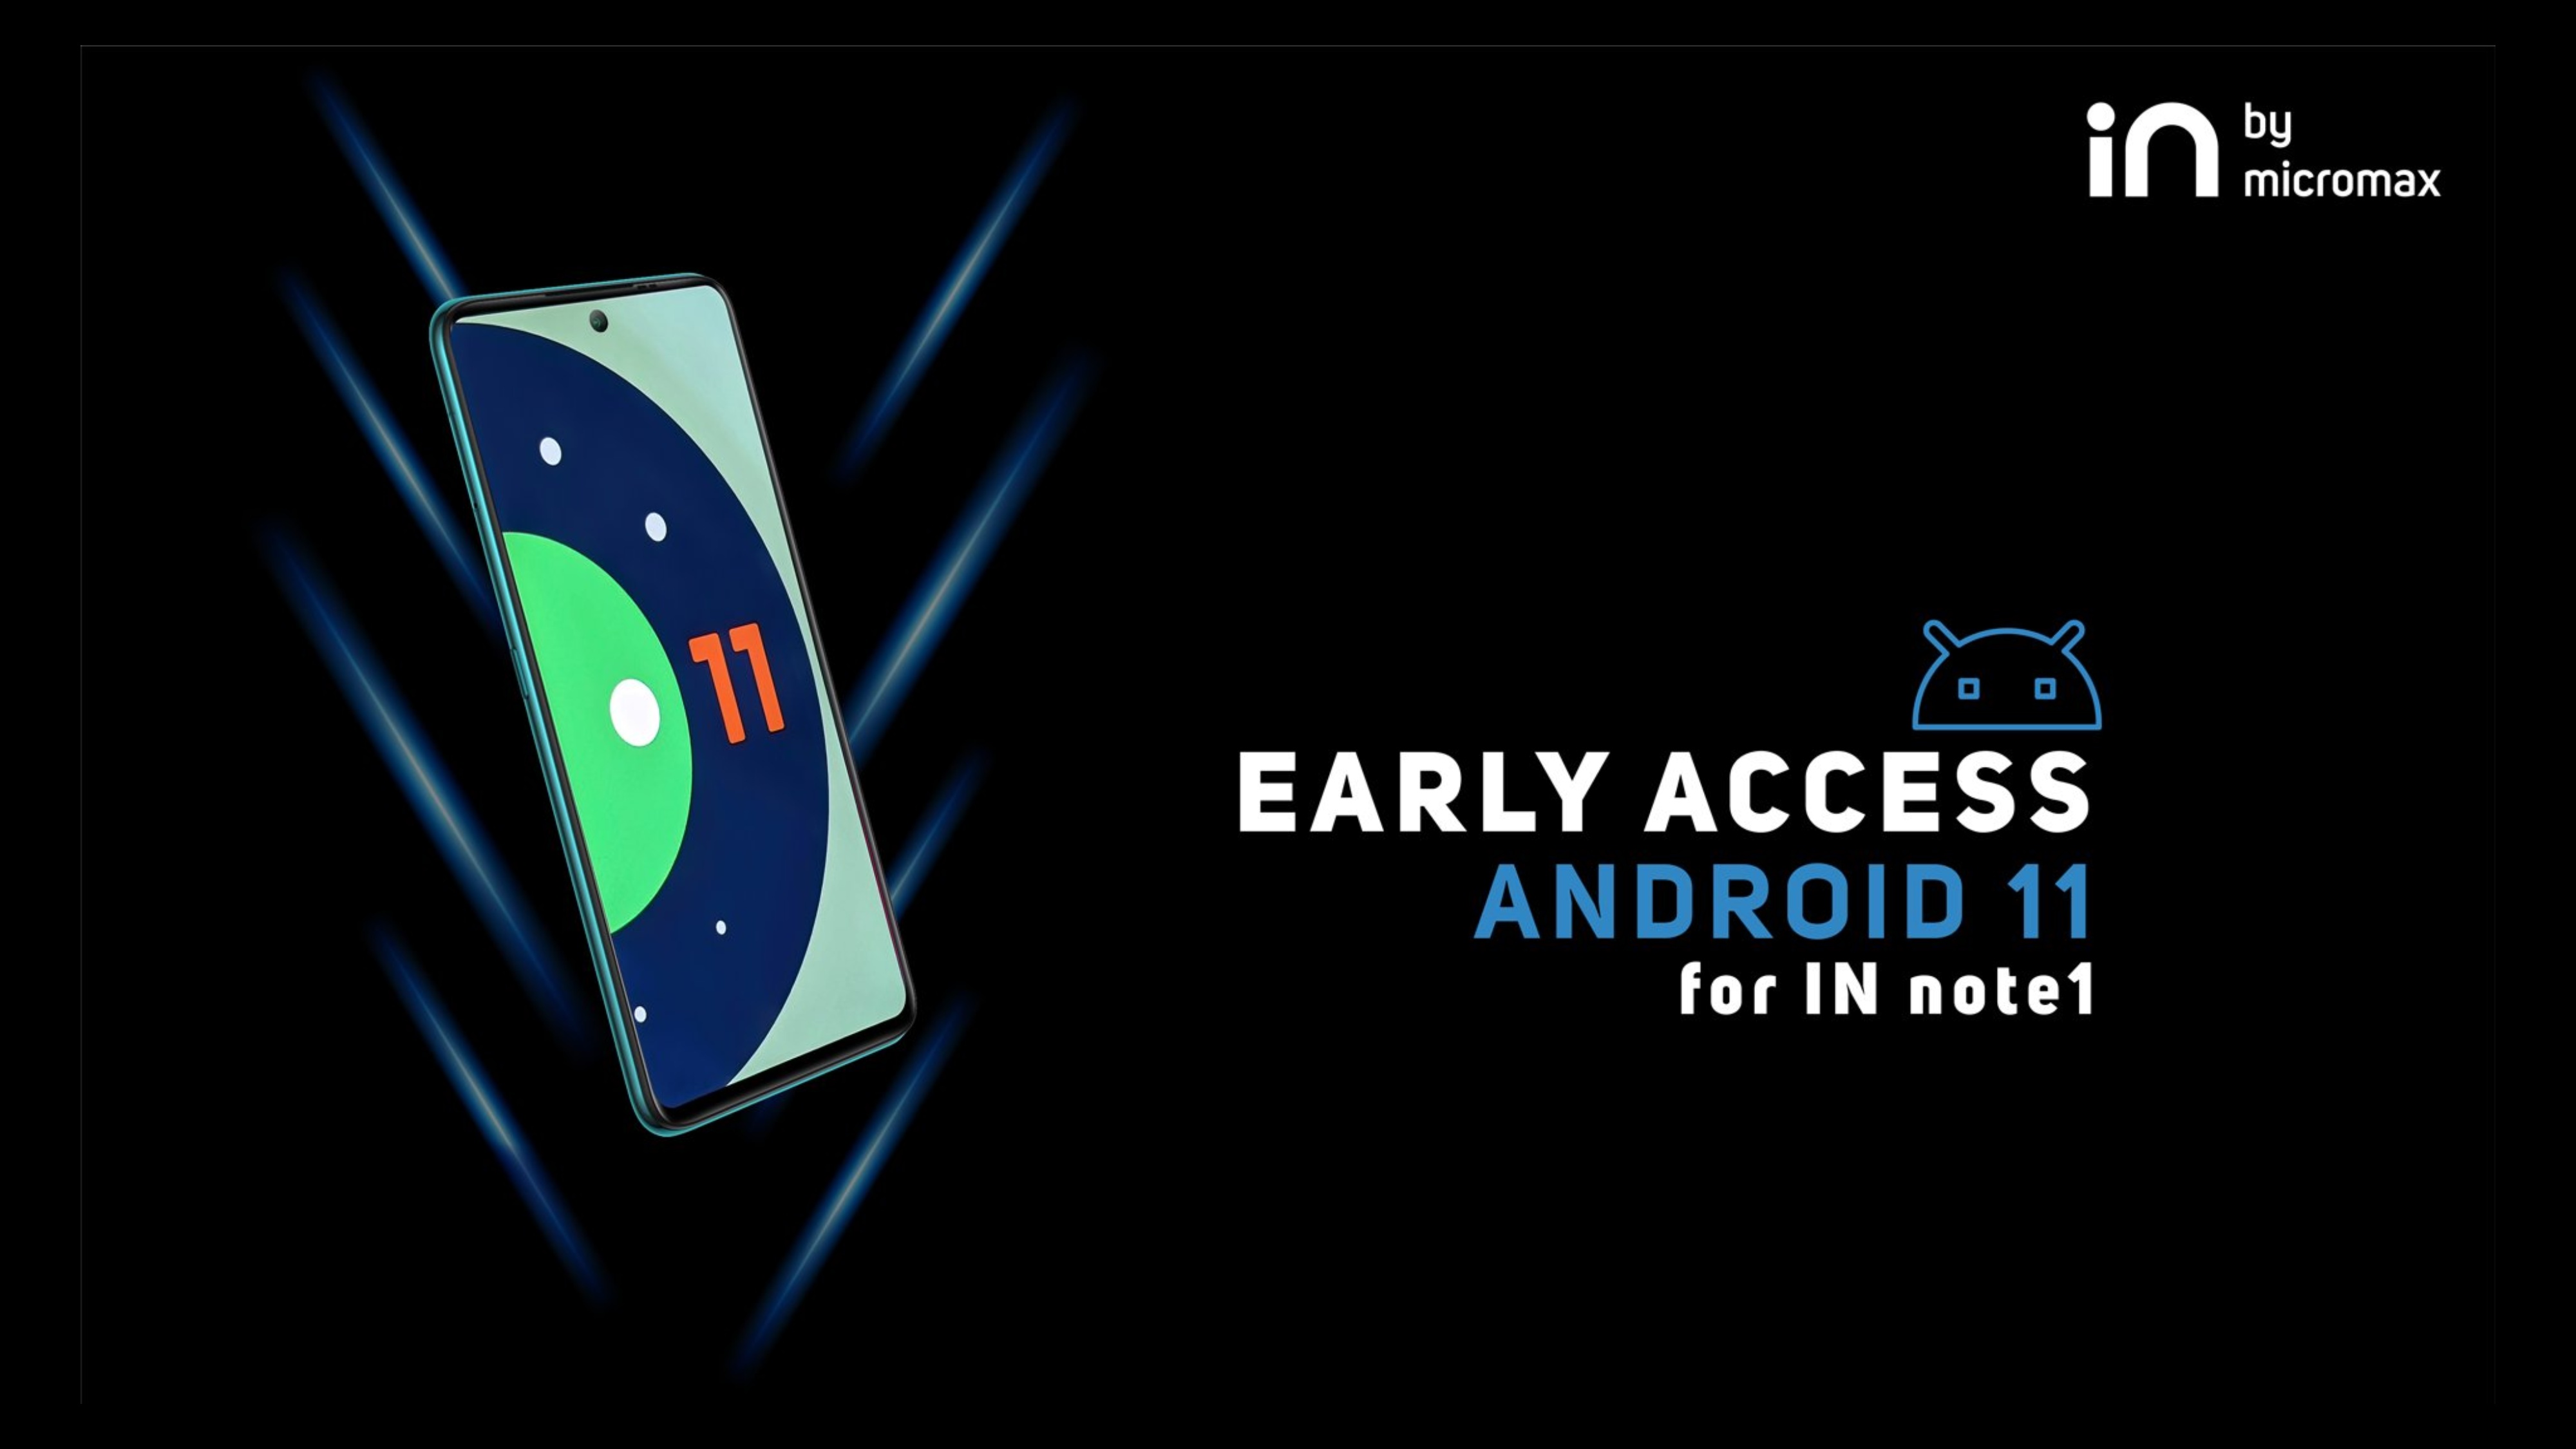 Micromax IN Note 1 Android 11 Early Access